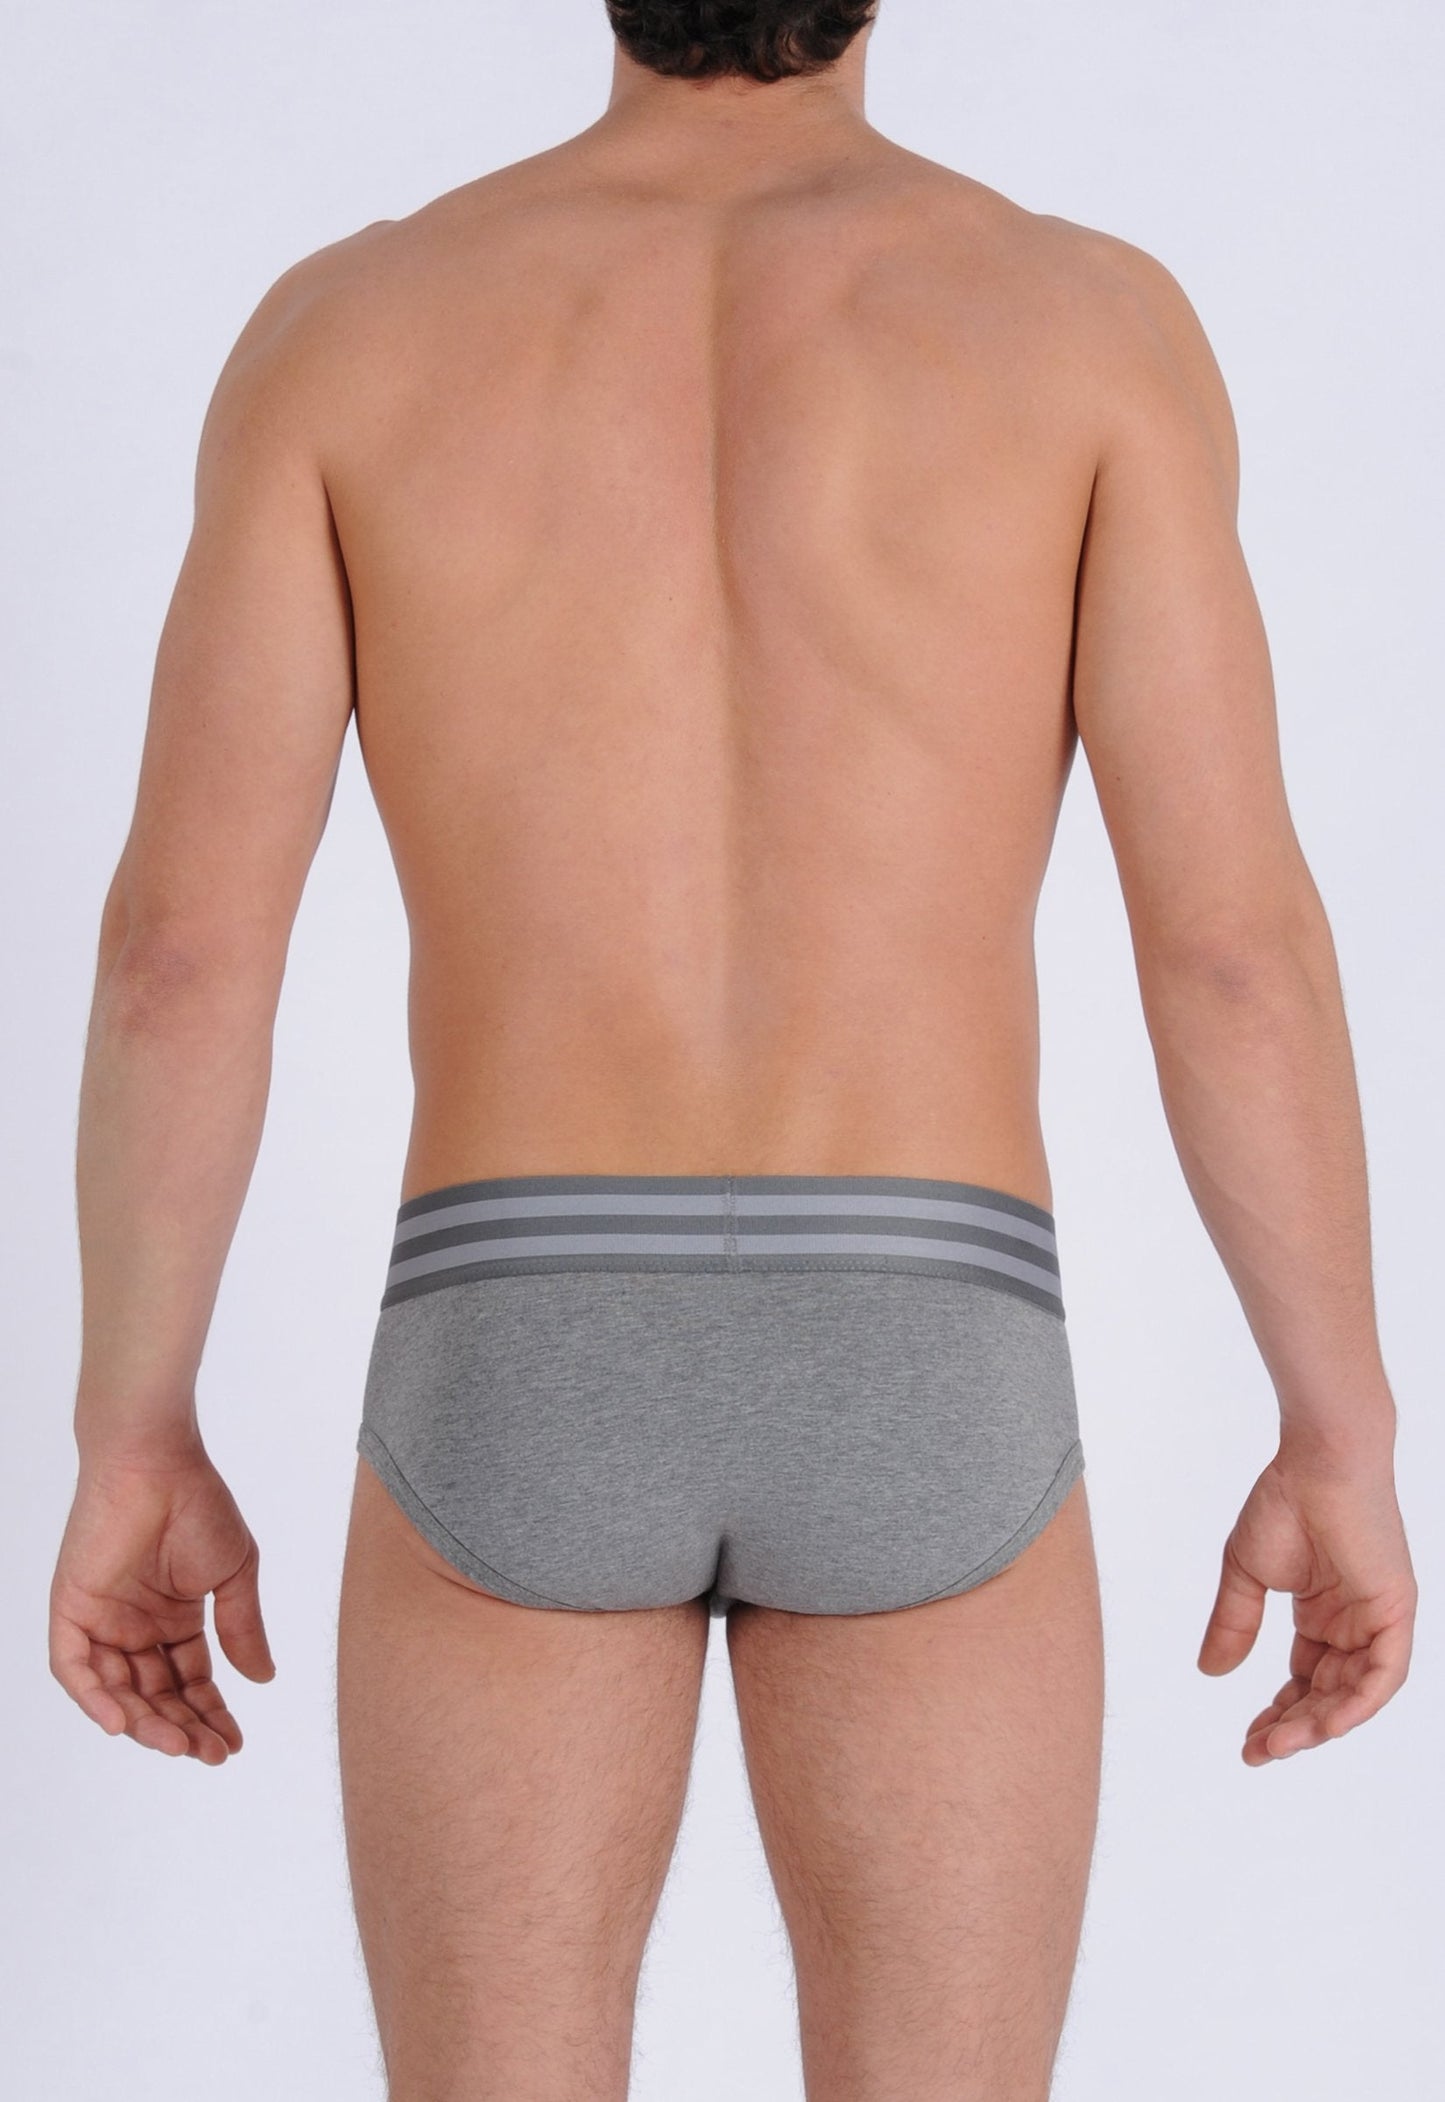 Ginch Gonch Men's Signature Series Underwear - Low Rise Brief grey printed thick waistband back